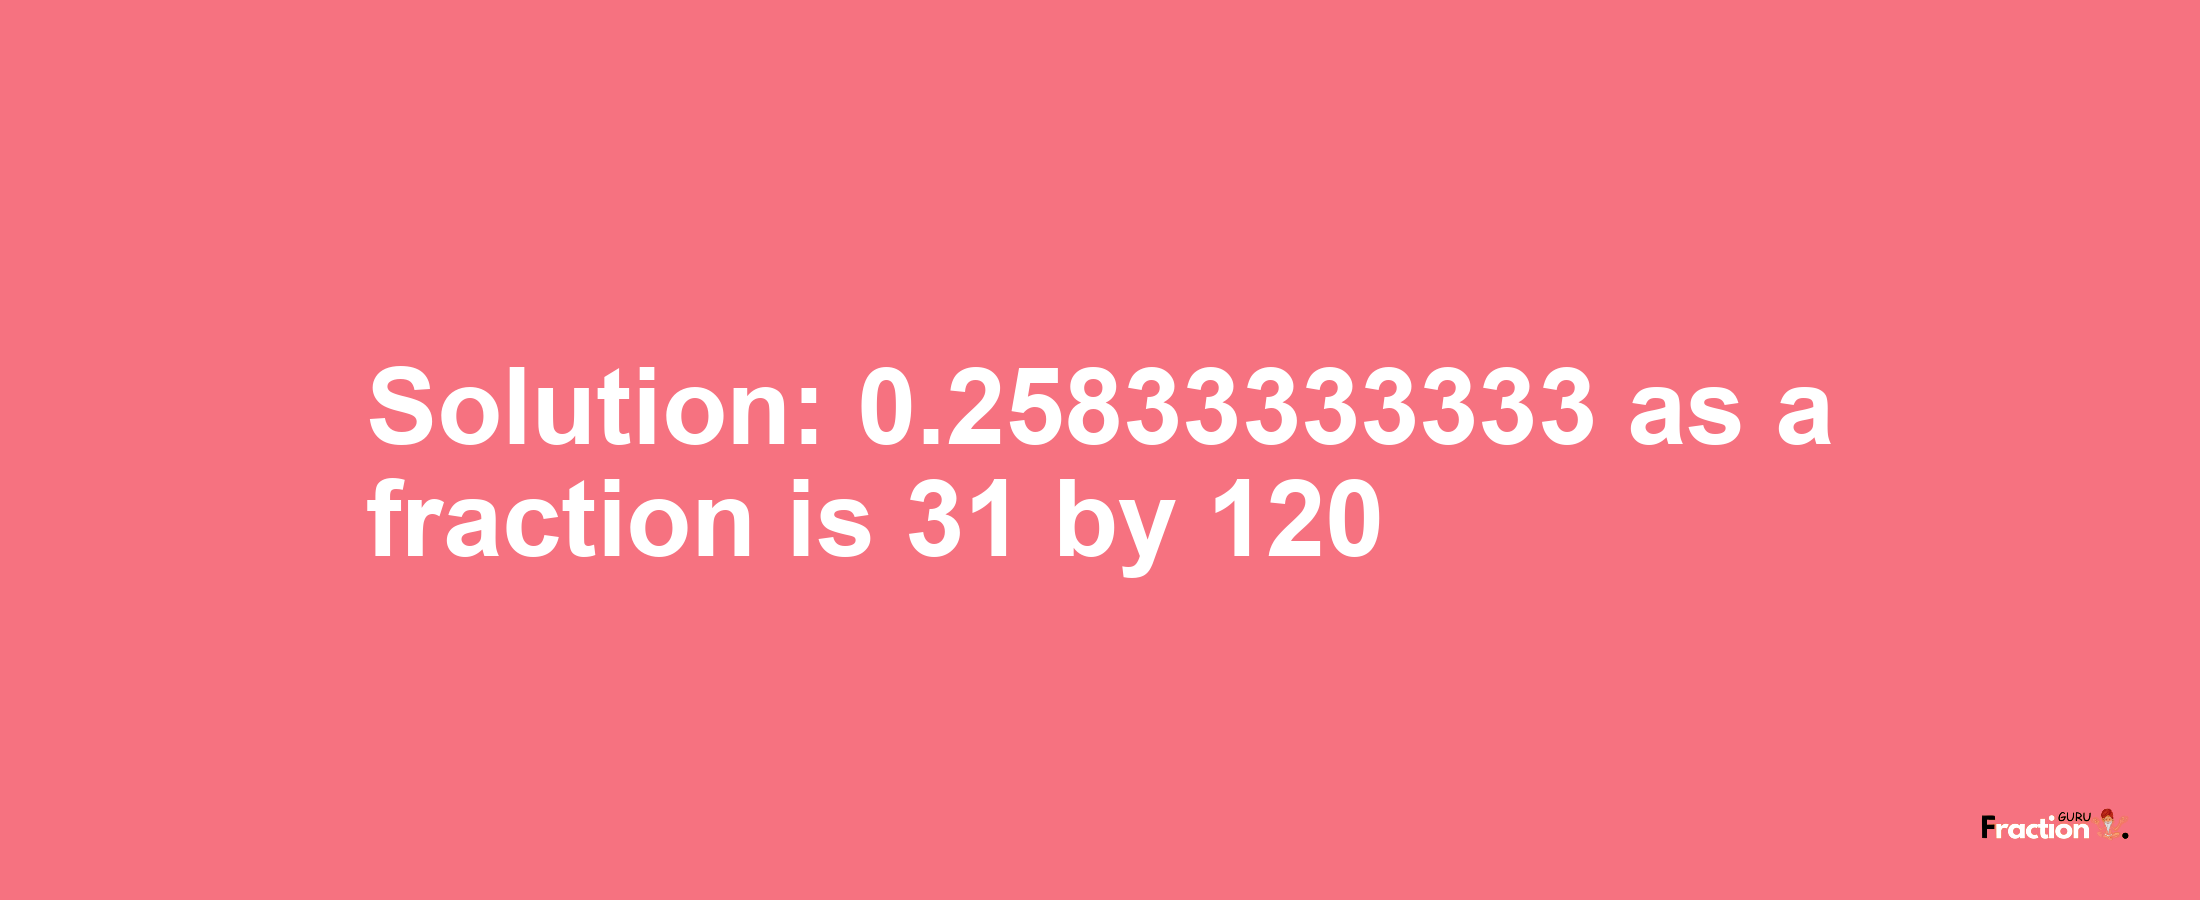 Solution:0.25833333333 as a fraction is 31/120